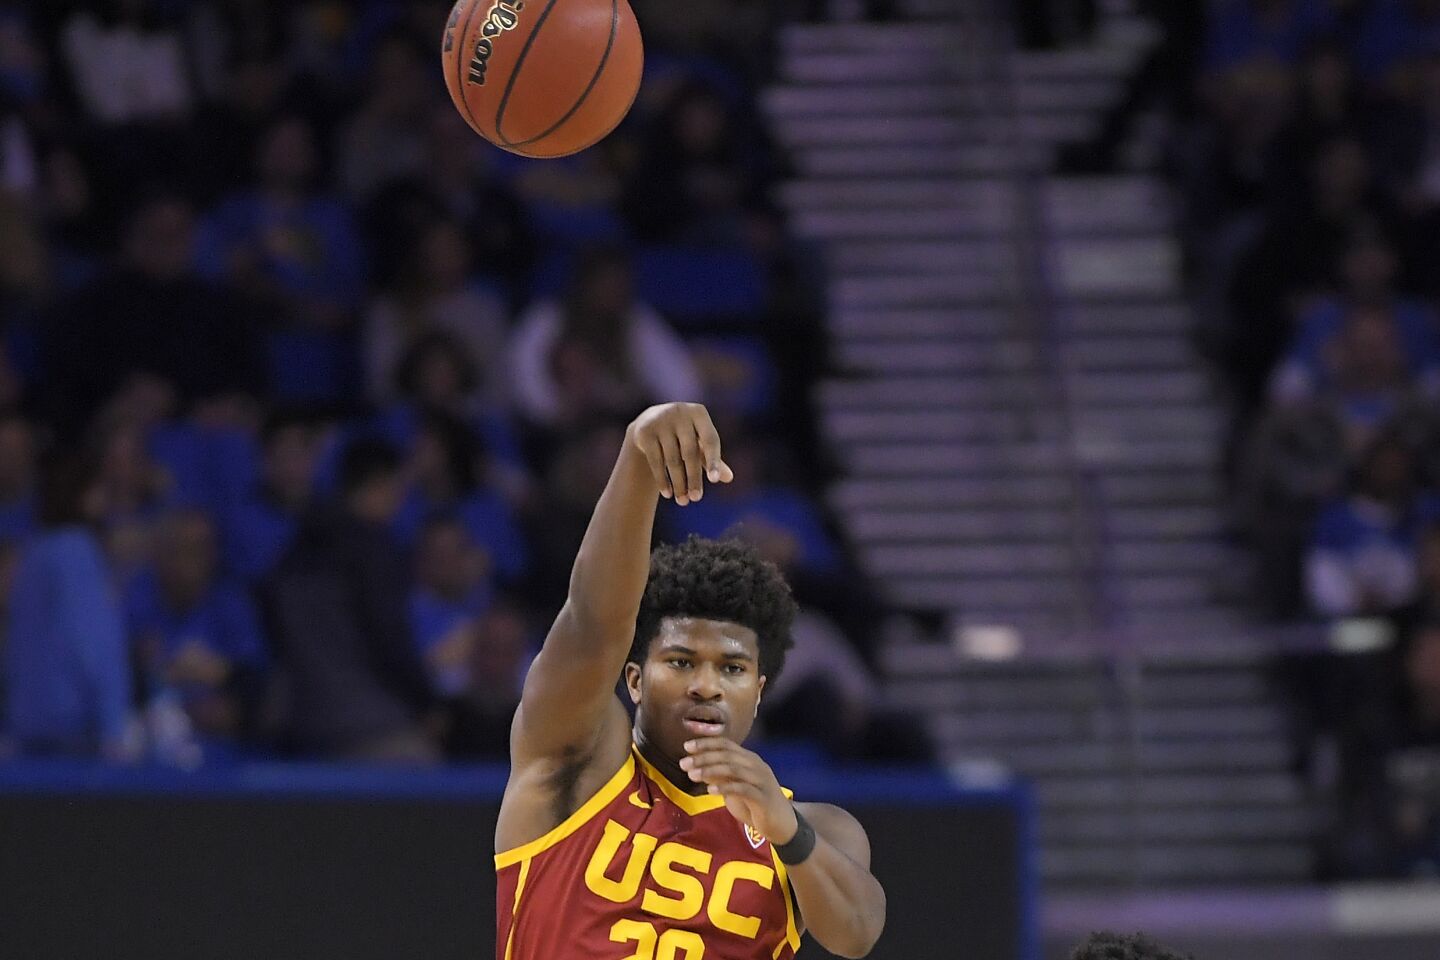 USC guard Ethan Anderson passes the ball over UCLA guards Tyger Campbell (10) and Chris Smith (5) during a game Jan. 11 at Pauley Pavilion.